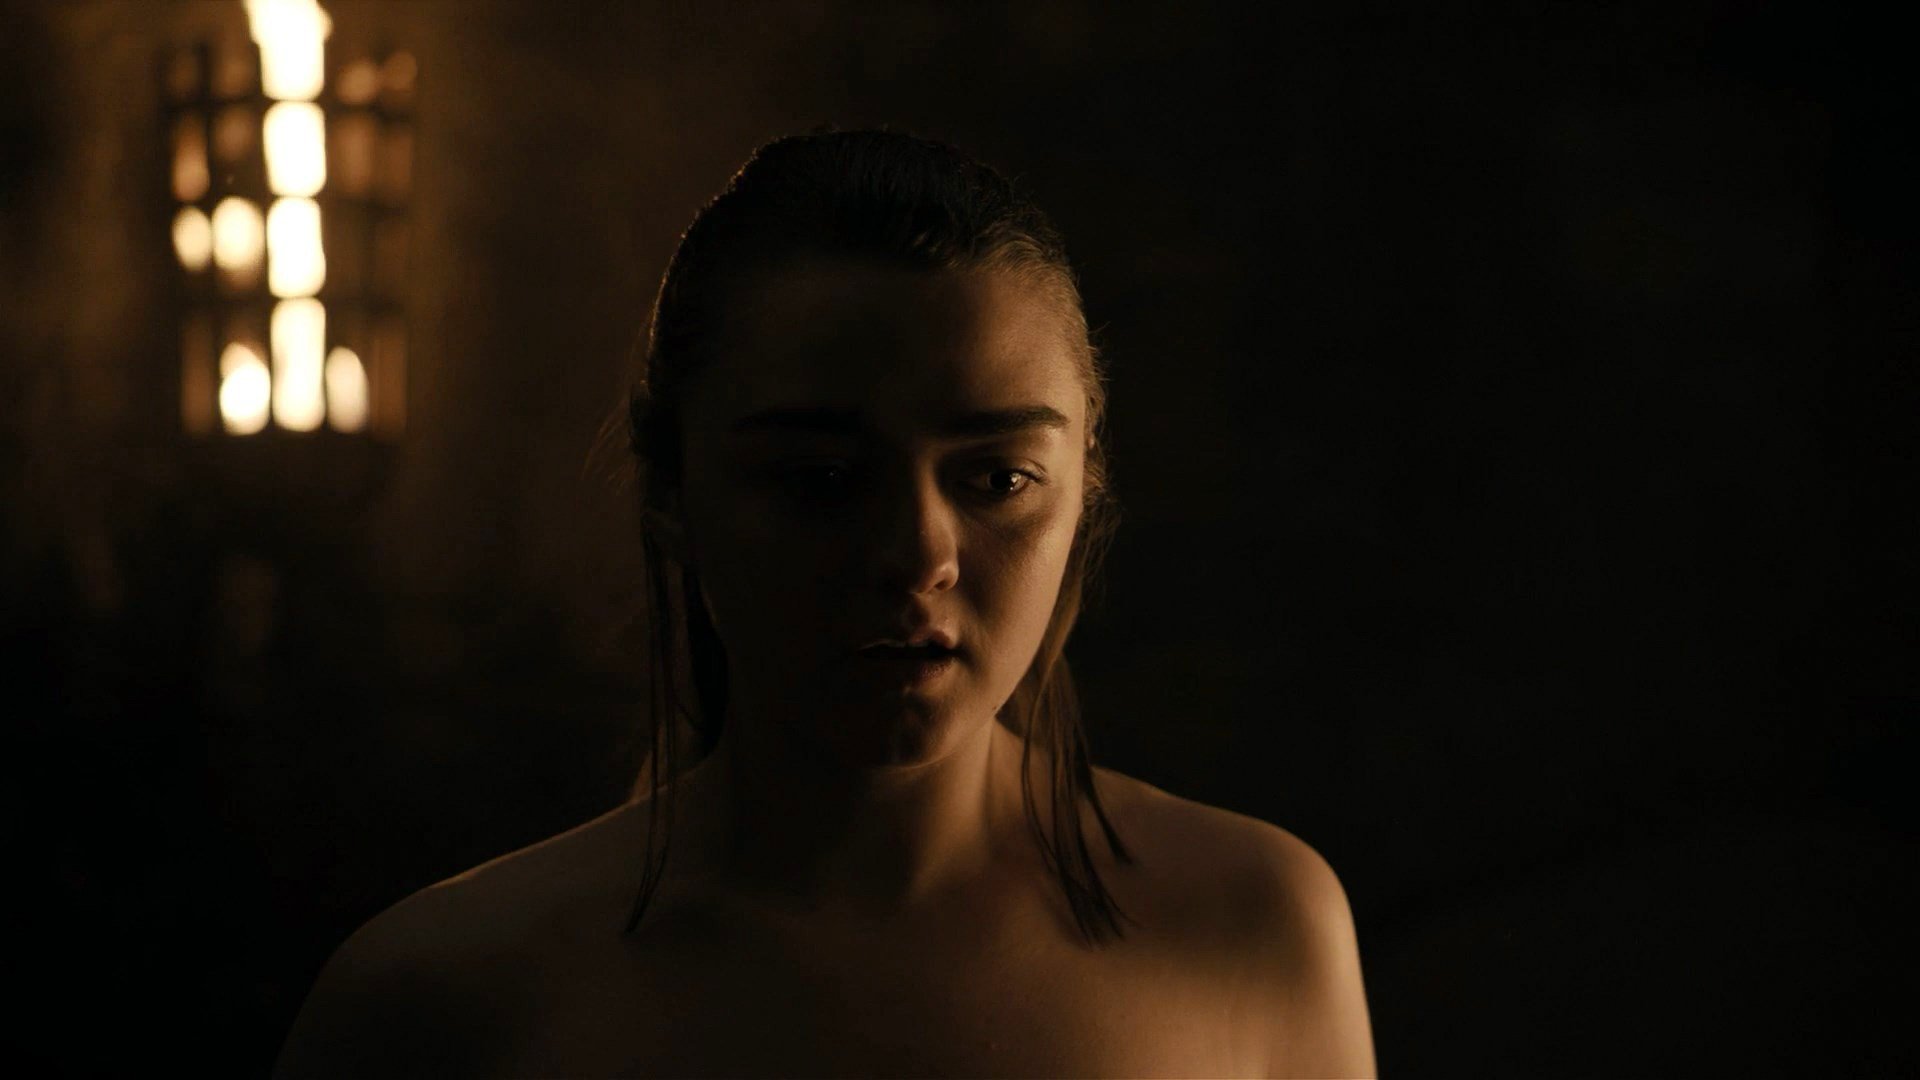 Maisie Williams - "Game of Thrones" Topless Scene (NSFW). 